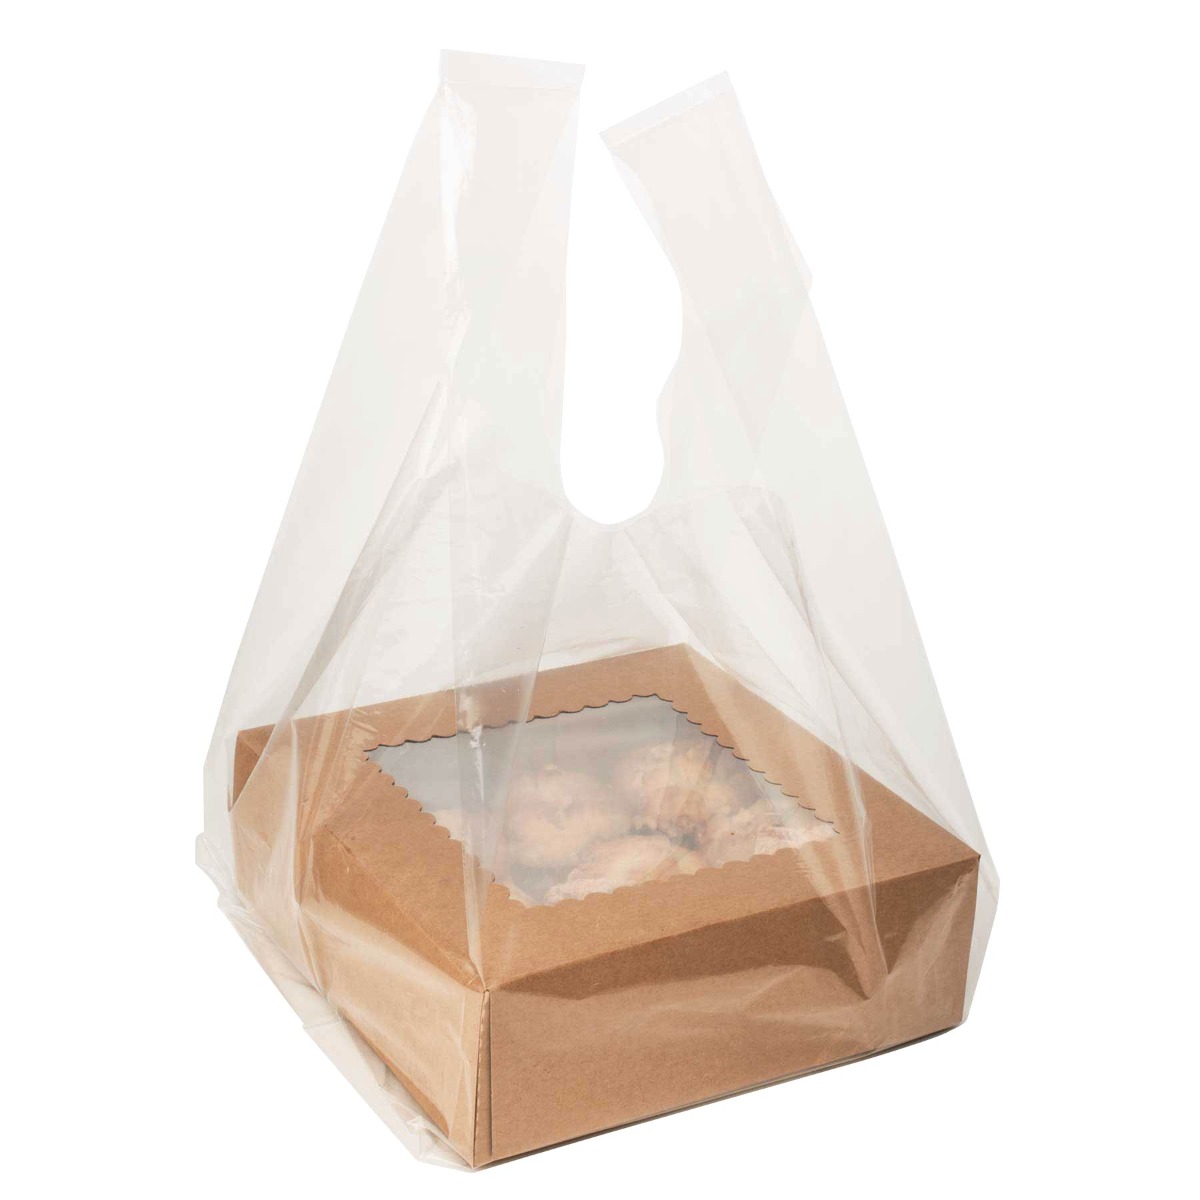 https://clearbags.ca/pub/media/catalog/product/c/h/chb1-clear-poly-handle-bag-1.jpg